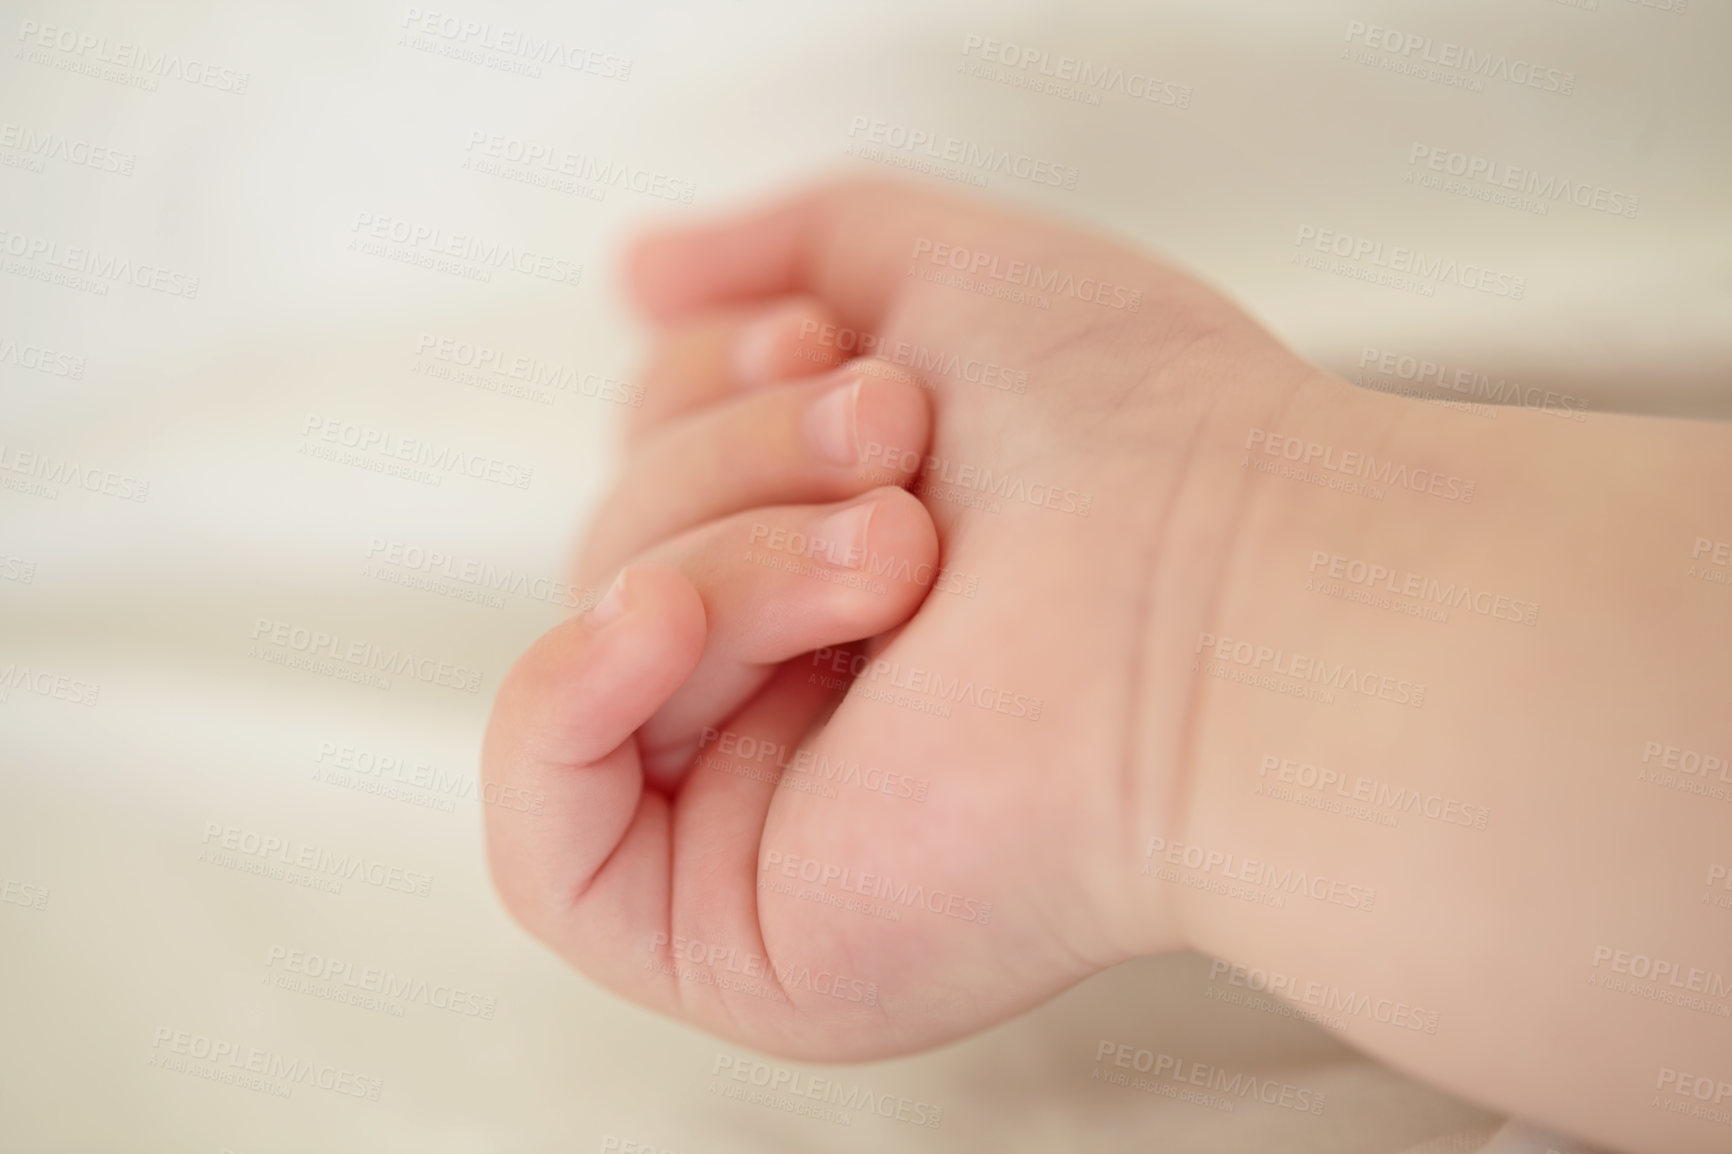 Buy stock photo Relax, development and the hand of a baby closeup in a nursery or bedroom of a home for rest at bedtime. Kids, sleeping or wellness with the fist and fingers of a newborn infant child lying on a bed